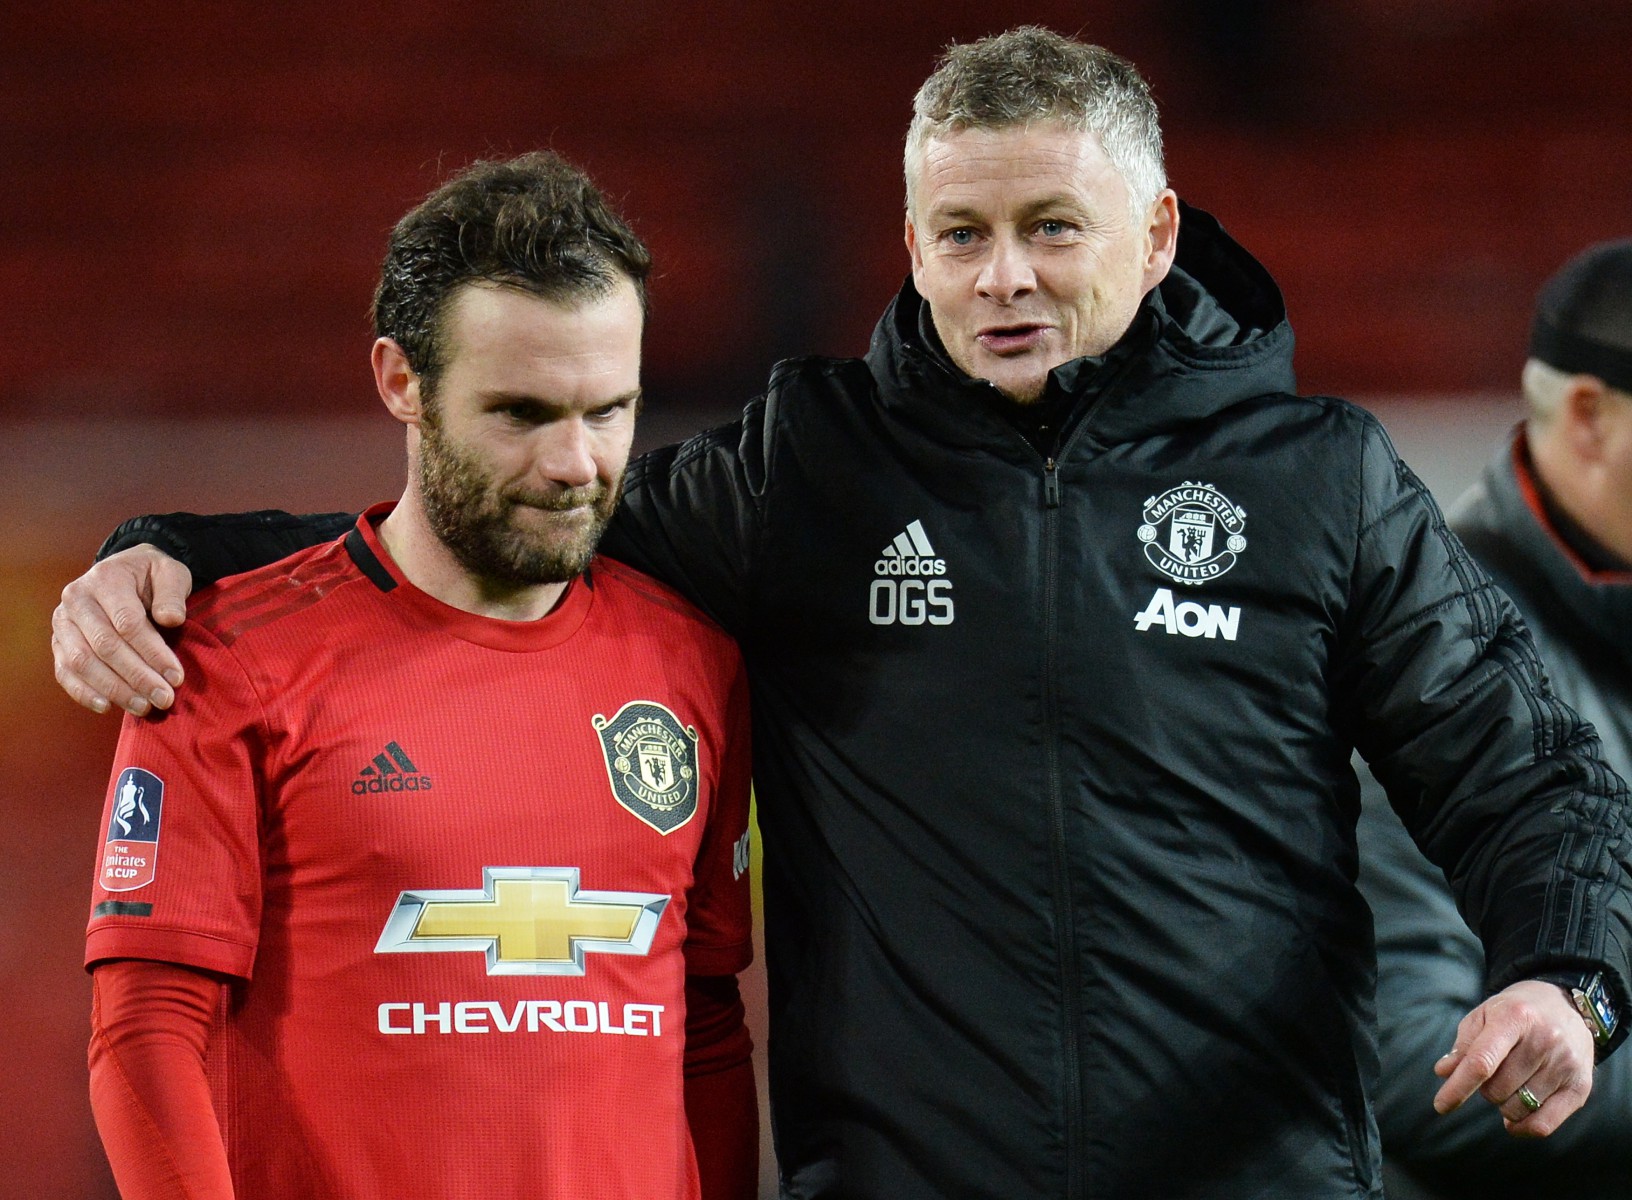 , Man Utd boss Solskjaer reveals tactics note contained genius instructions for Mata to swap wings with James before goal